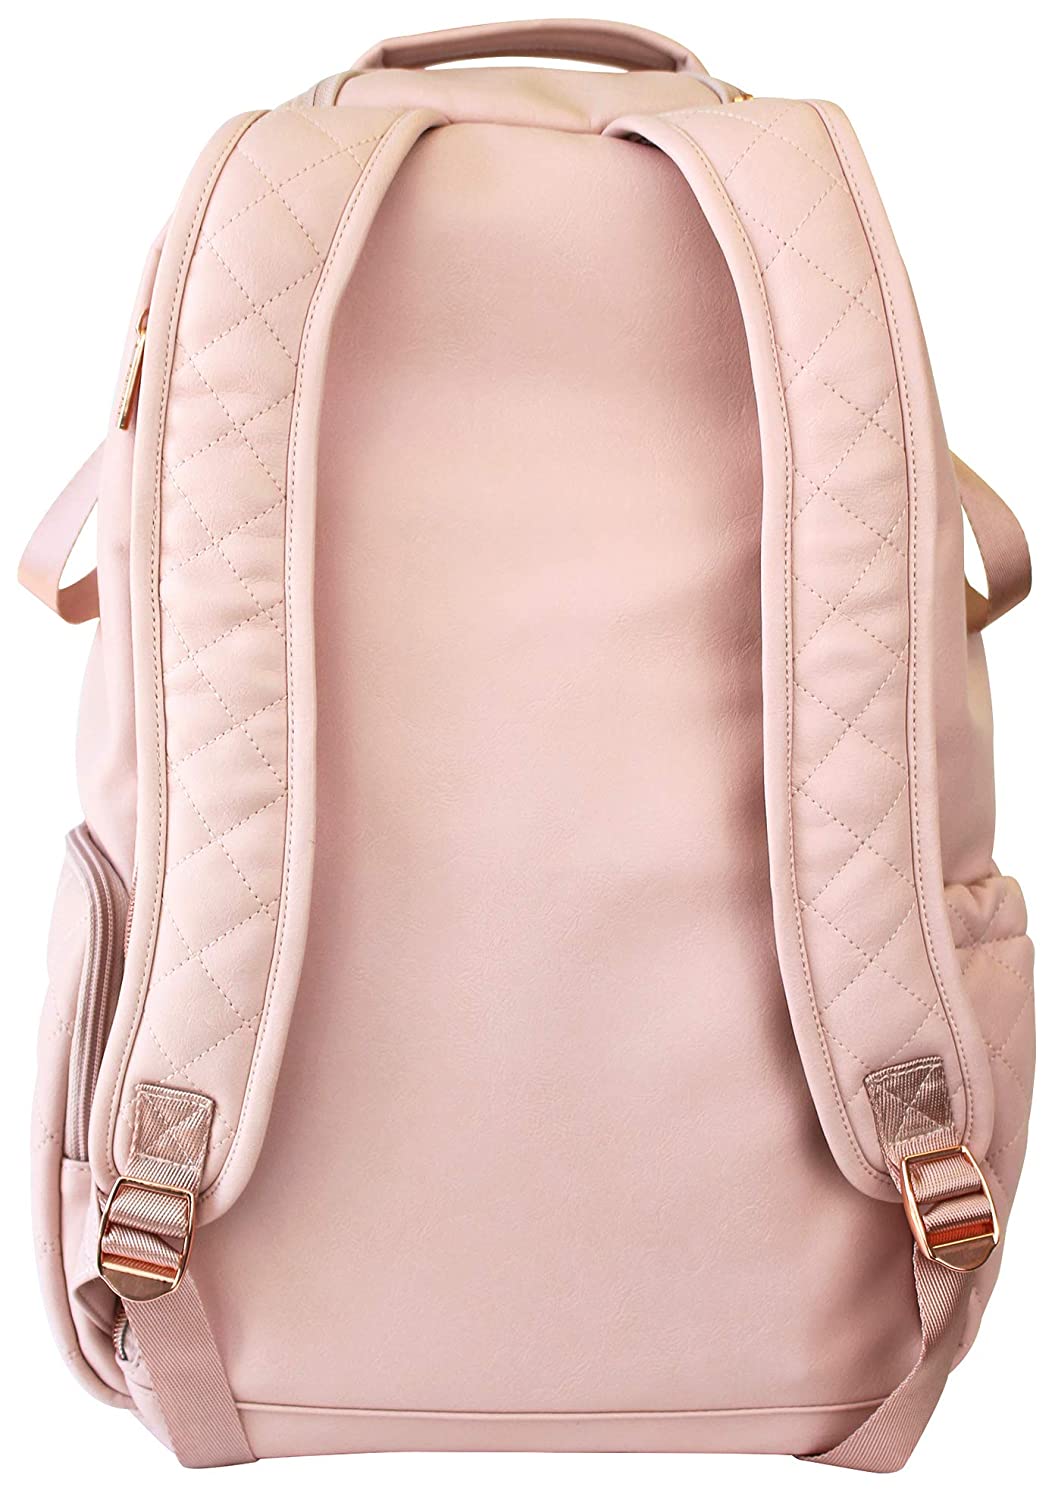 Itzy Ritzy Diaper Bag Backpack – Large Capacity Boss Backpack Diaper Bag Featuring Bottle Pockets, Changing Pad, Stroller Clips and Comfortable Backpack Straps, Blush